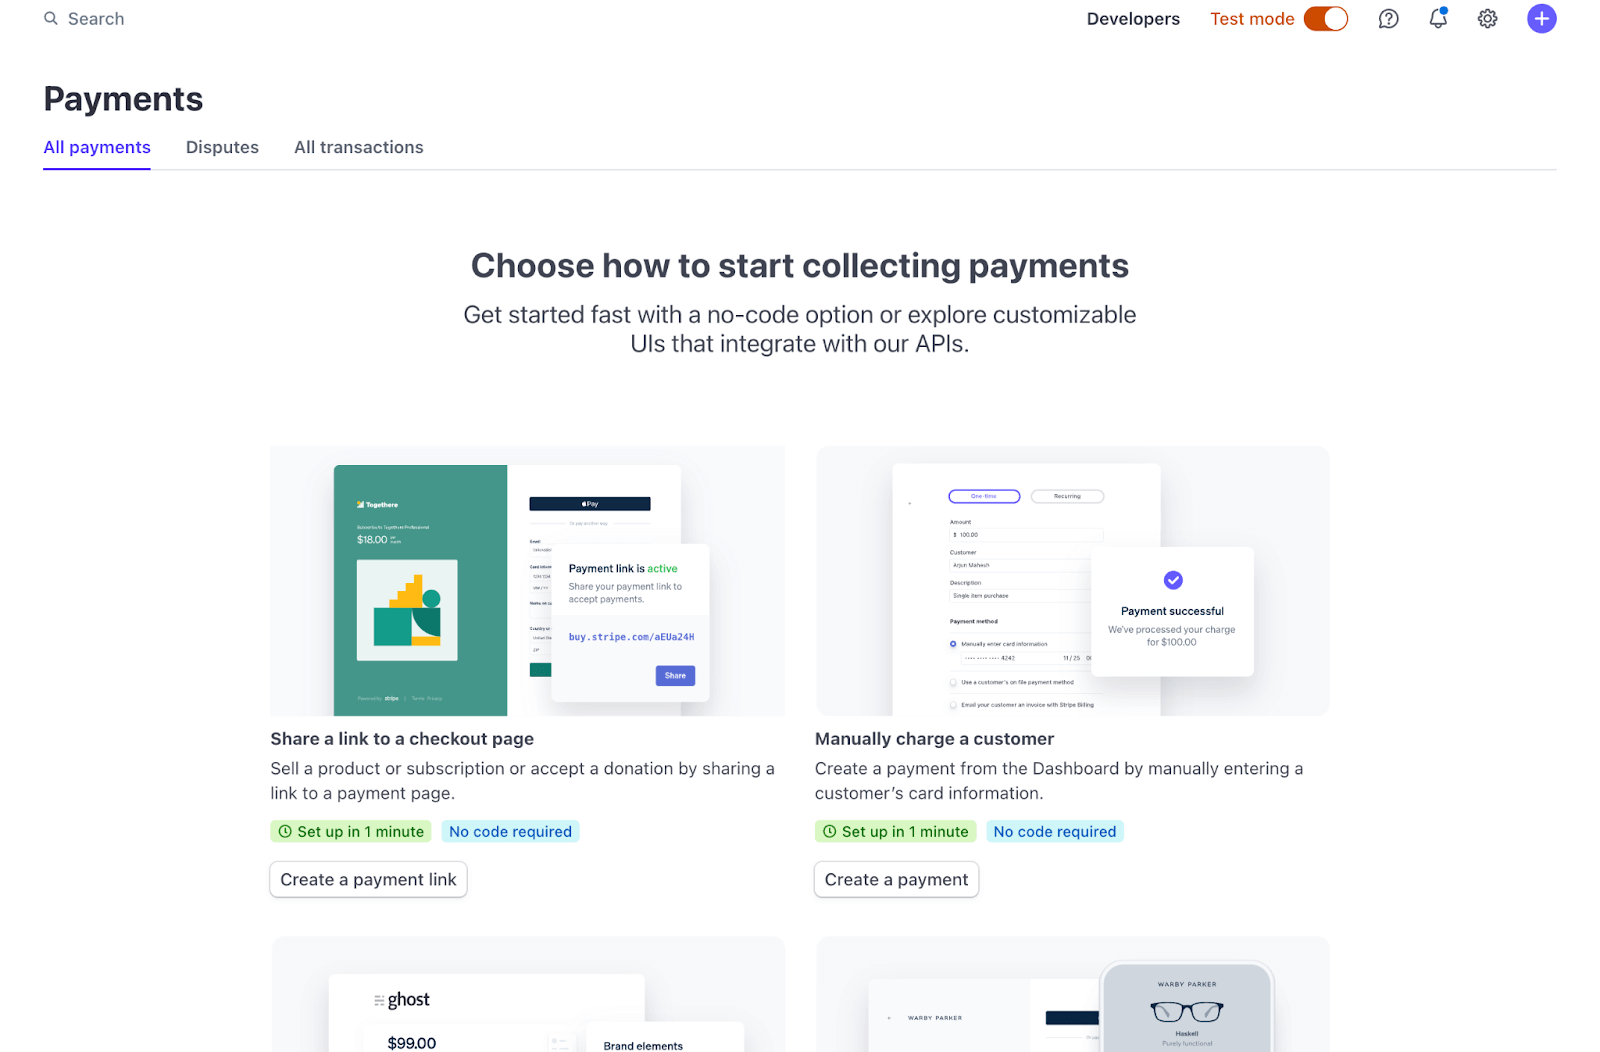 A screenshot of Stripe's "All payments" tab. There is no history so it shows links to different getting started guides.